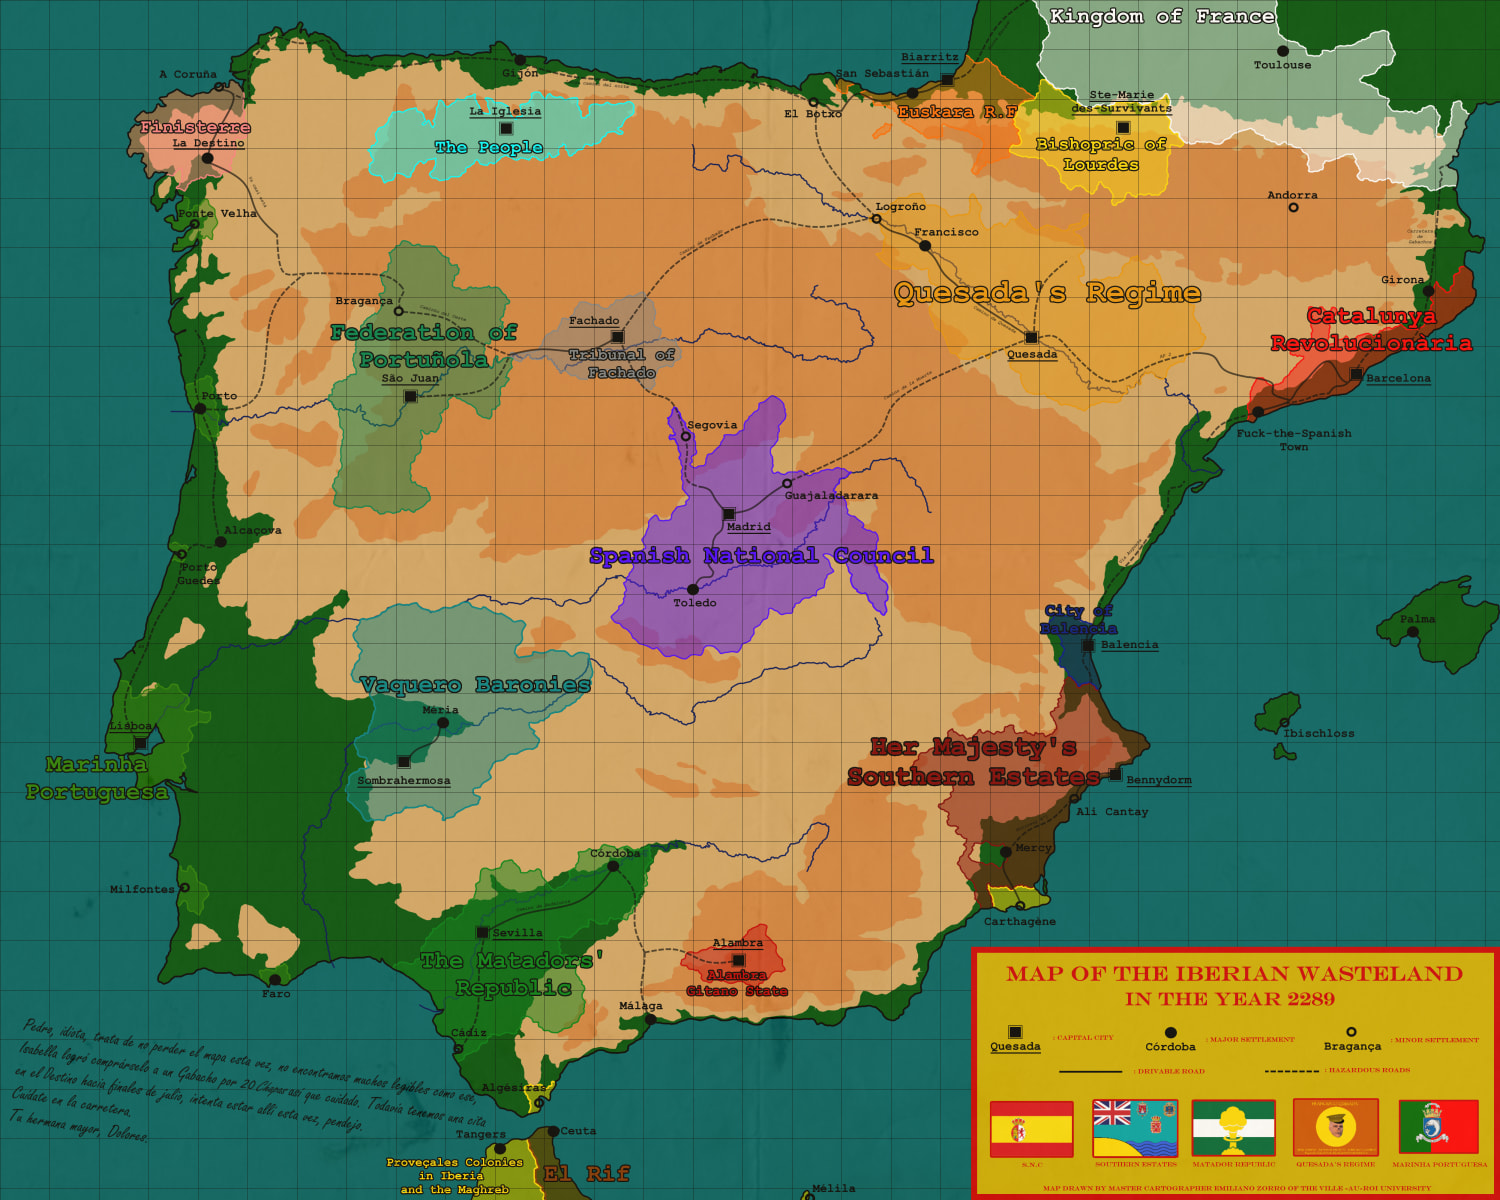 Fallout : Iberia - A map of the Spanish and Portuguese Wasteland in 2289